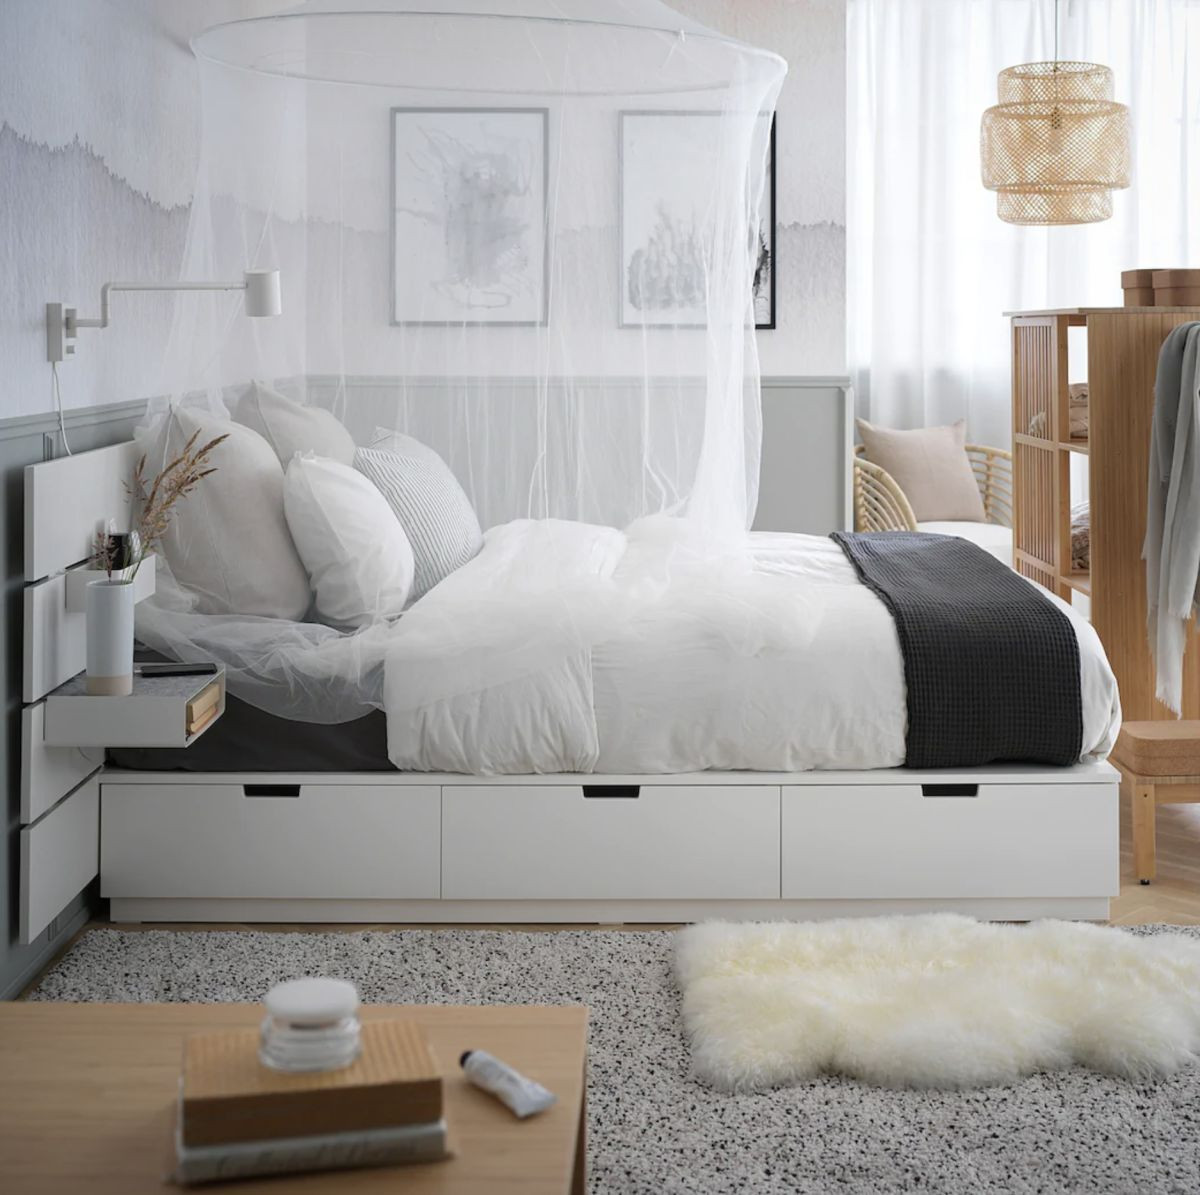 Ikea Small Bedroom
 These 3 Ikea storage beds will solve all your small